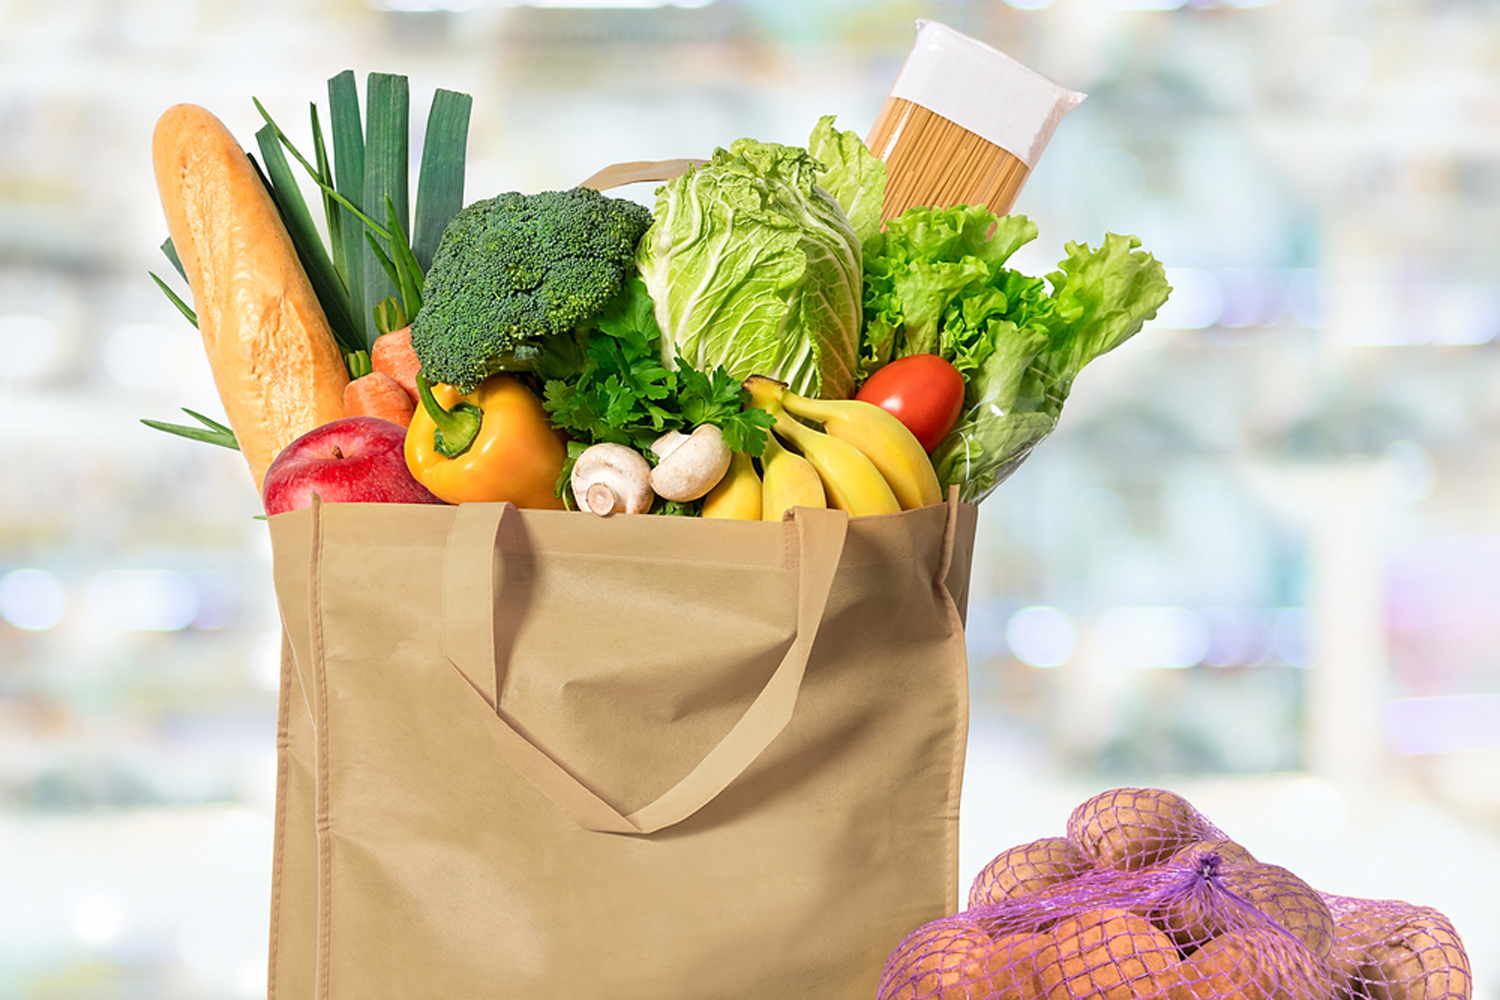 Earn extra Carrefour points on International Plastic Bag Free Day